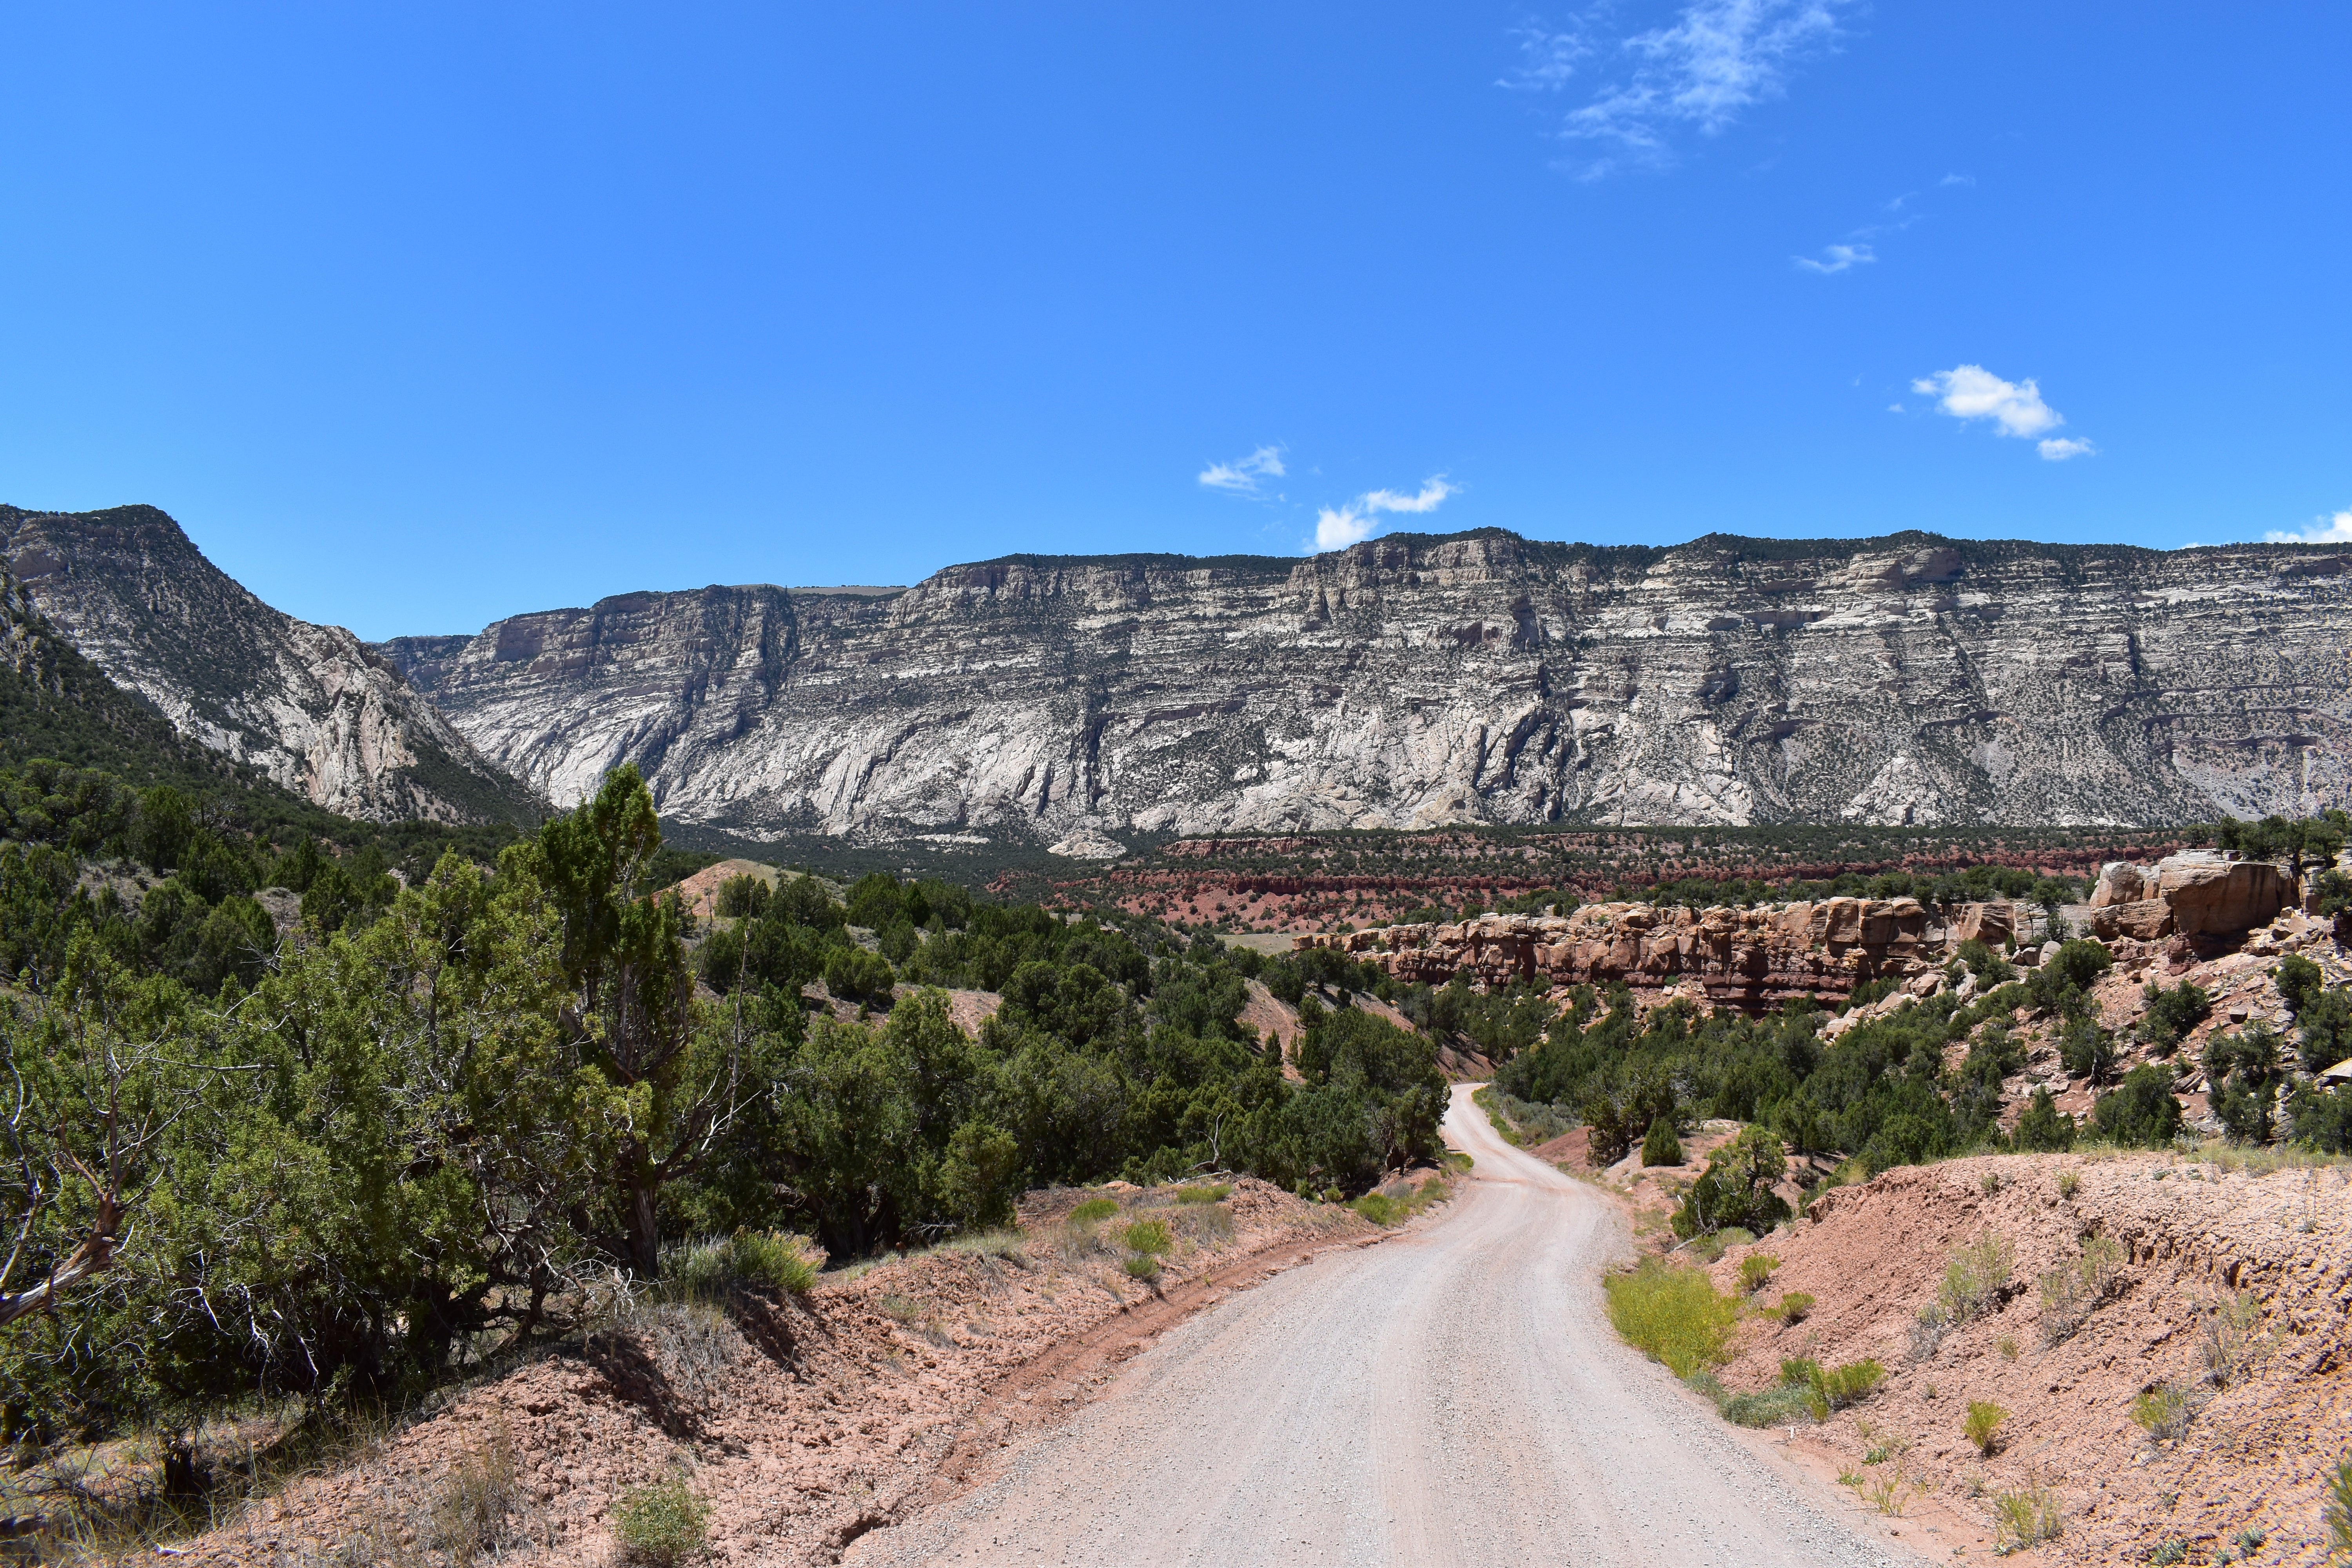 Camper submitted image from Echo Park Campground Group Site — Dinosaur National Monument - 4